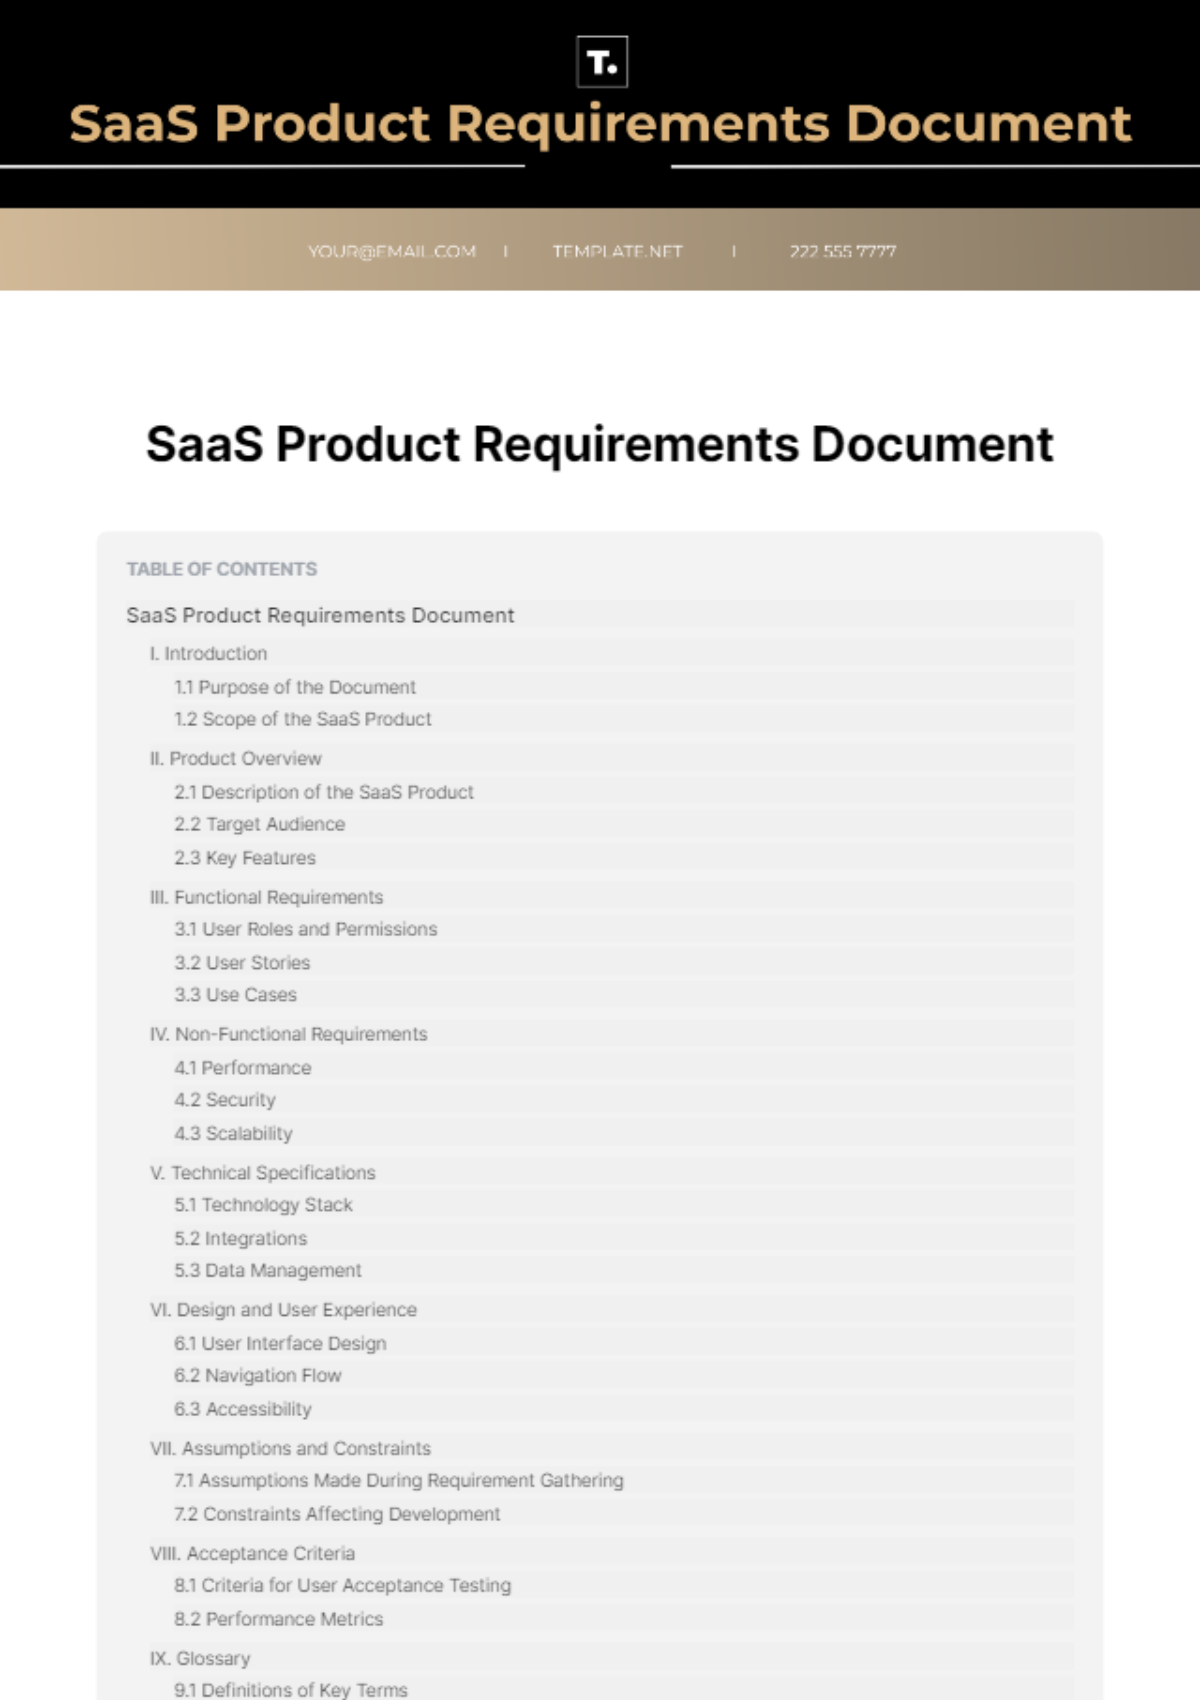 SaaS Product Requirements Document Template